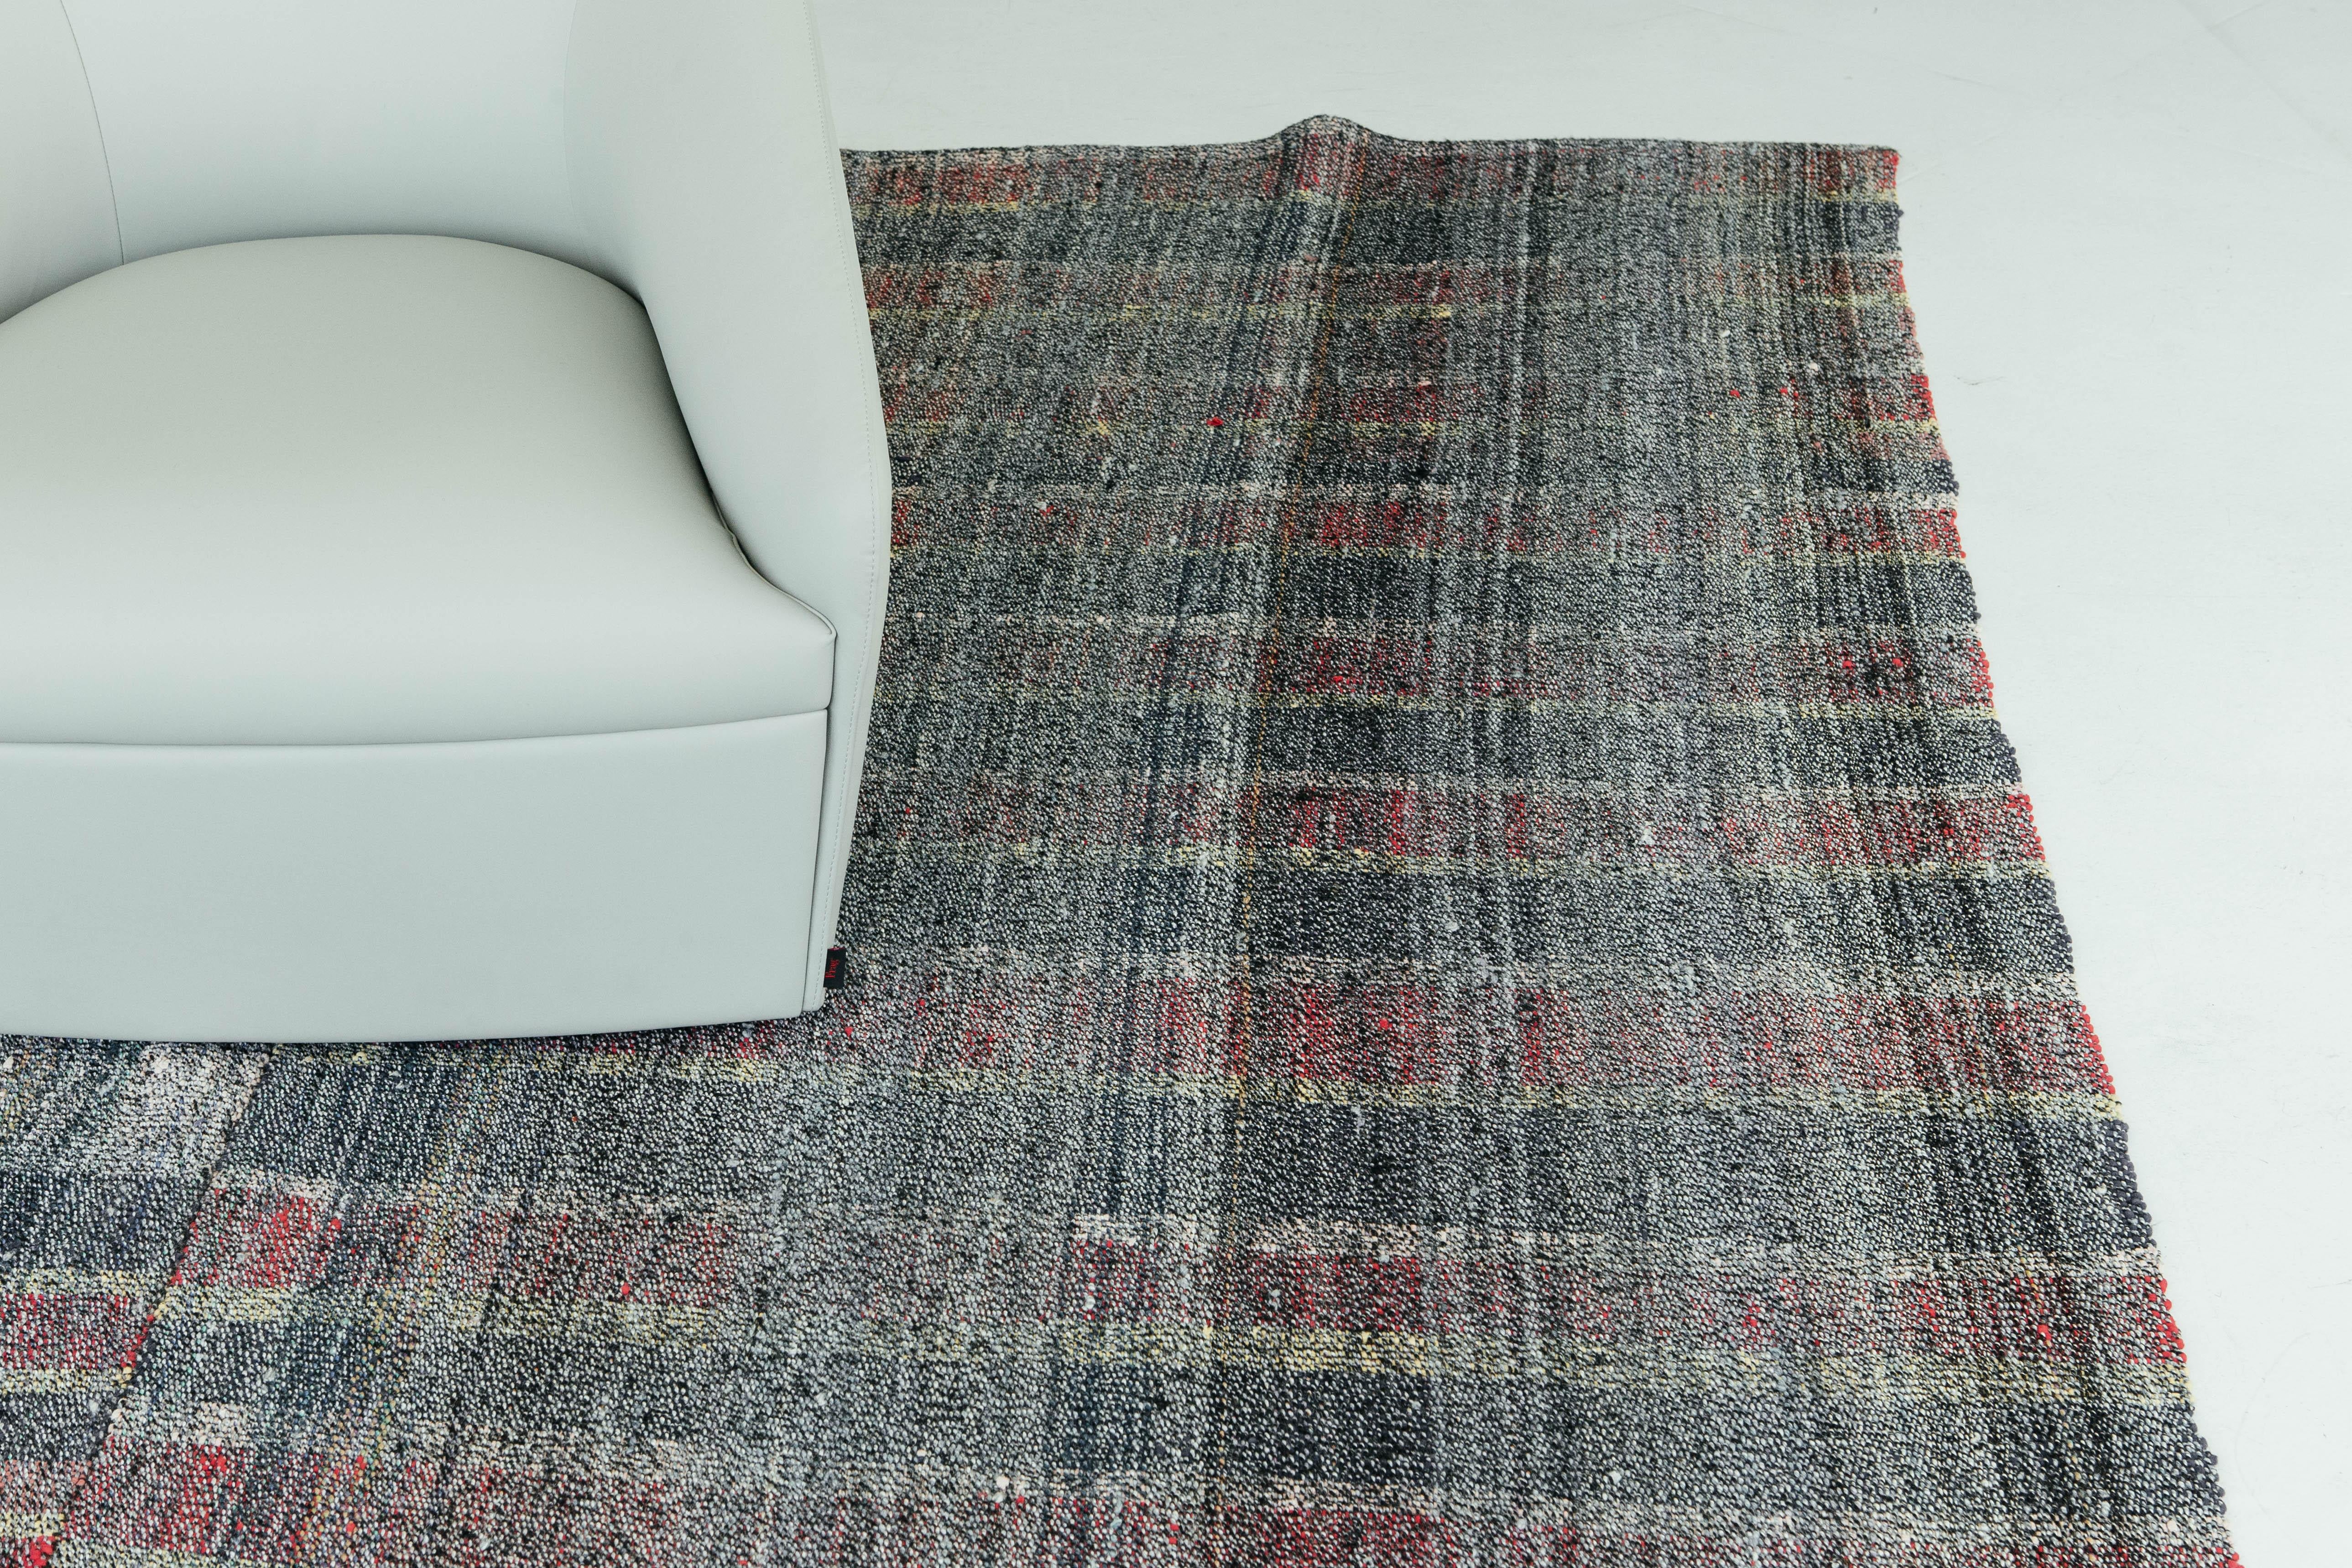 This Turkish Tisse Kilim weaves together beautiful colors to create an irregular plaid pattern. Mauve, forest green, and yellow are just some of the many colors that create a cohesive look in an interesting texture. This flat-weave would be a great